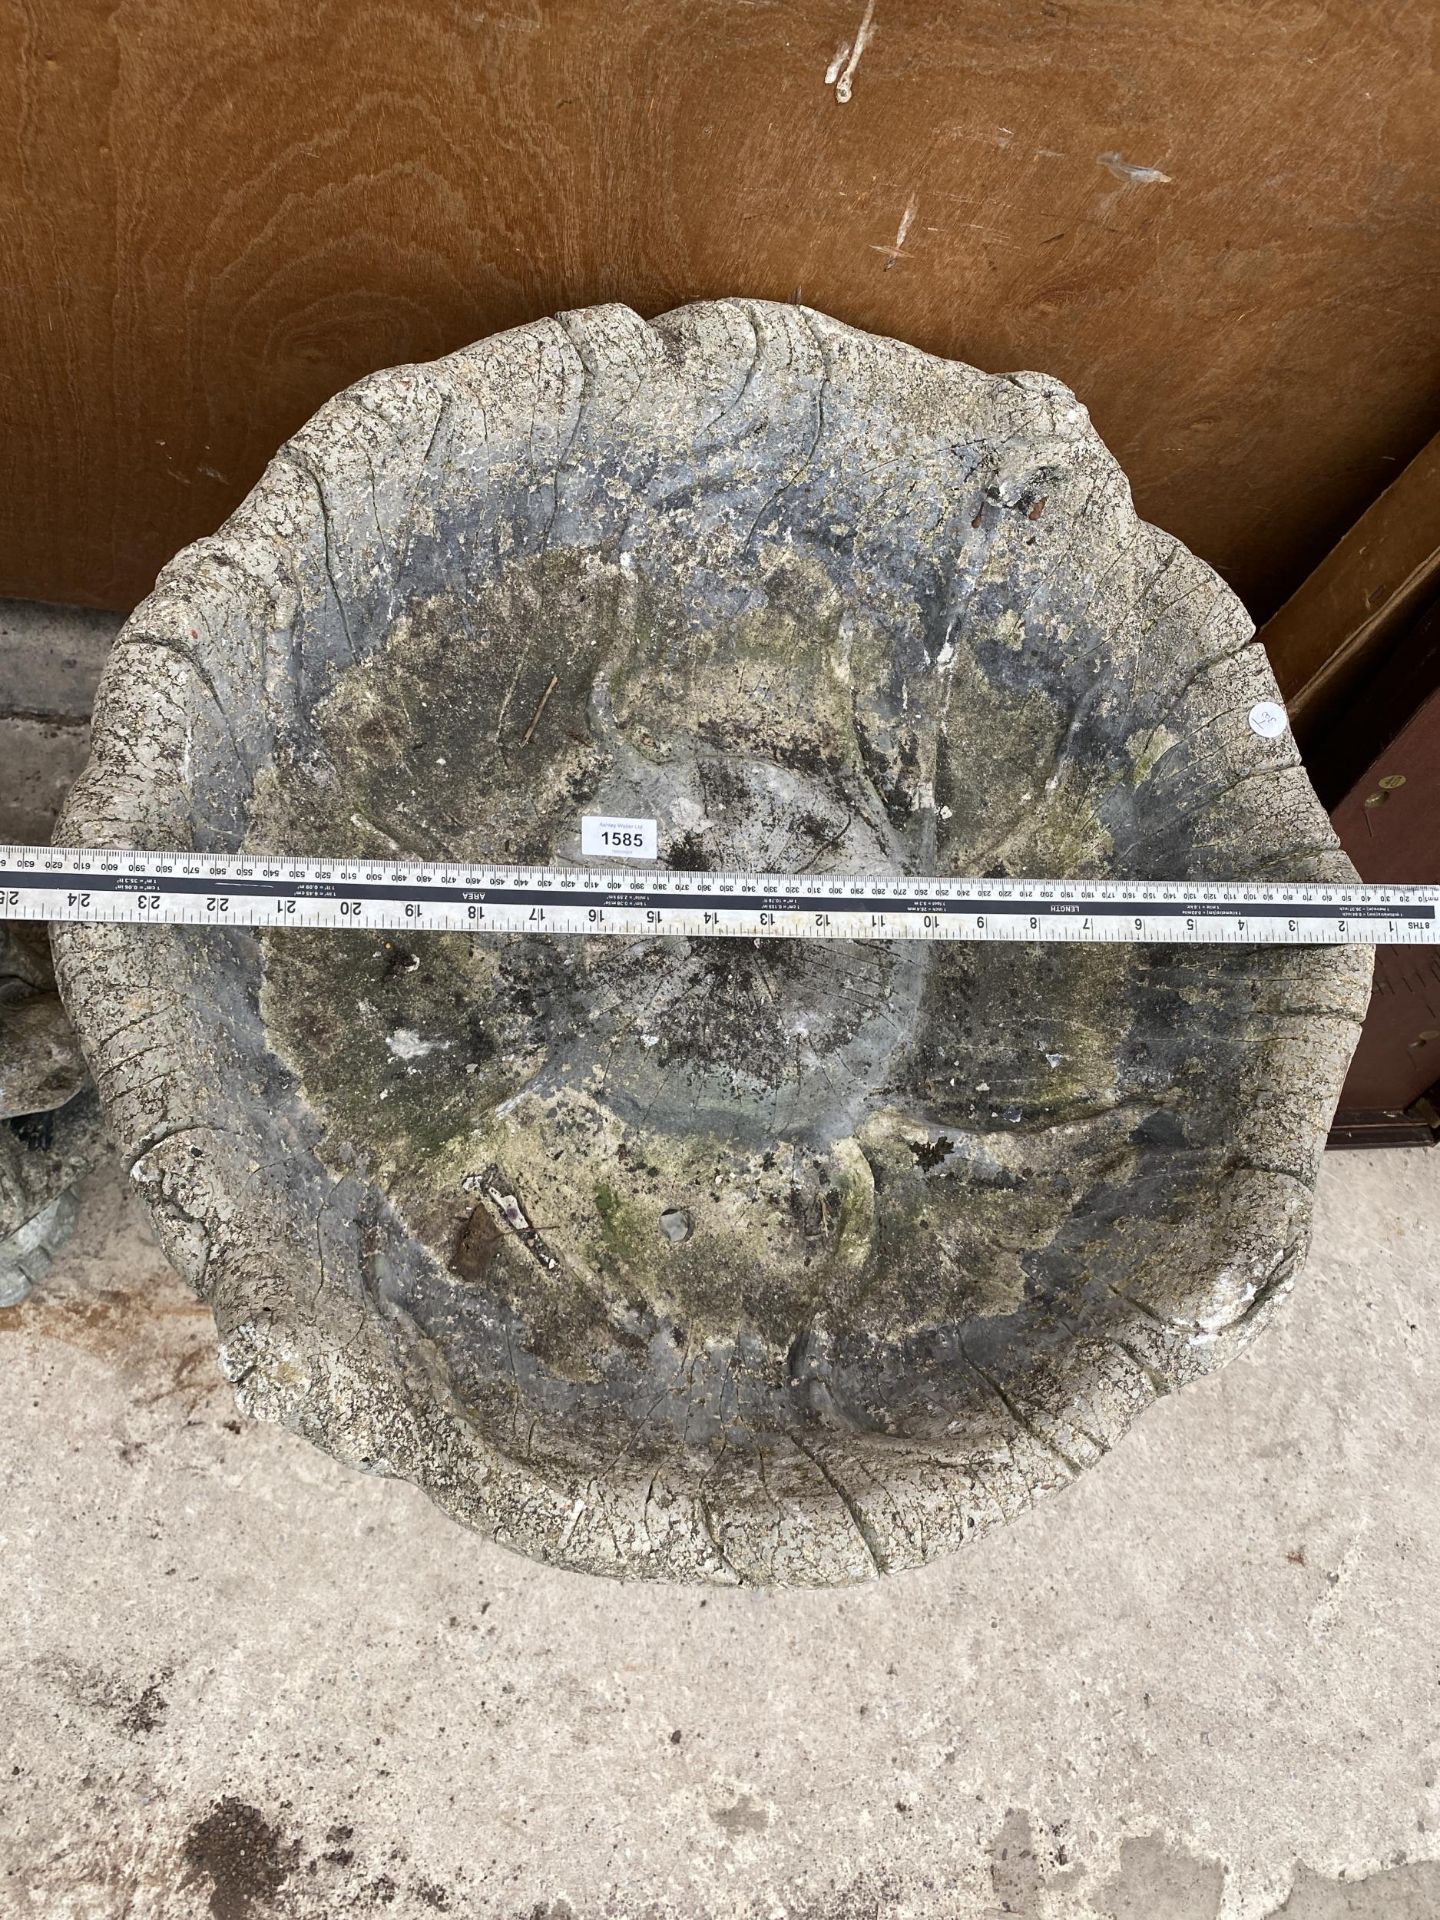 A LARGE RECONSTITUTED STONE BIRD BATH WITH PEDESTAL BASE - Image 3 of 4